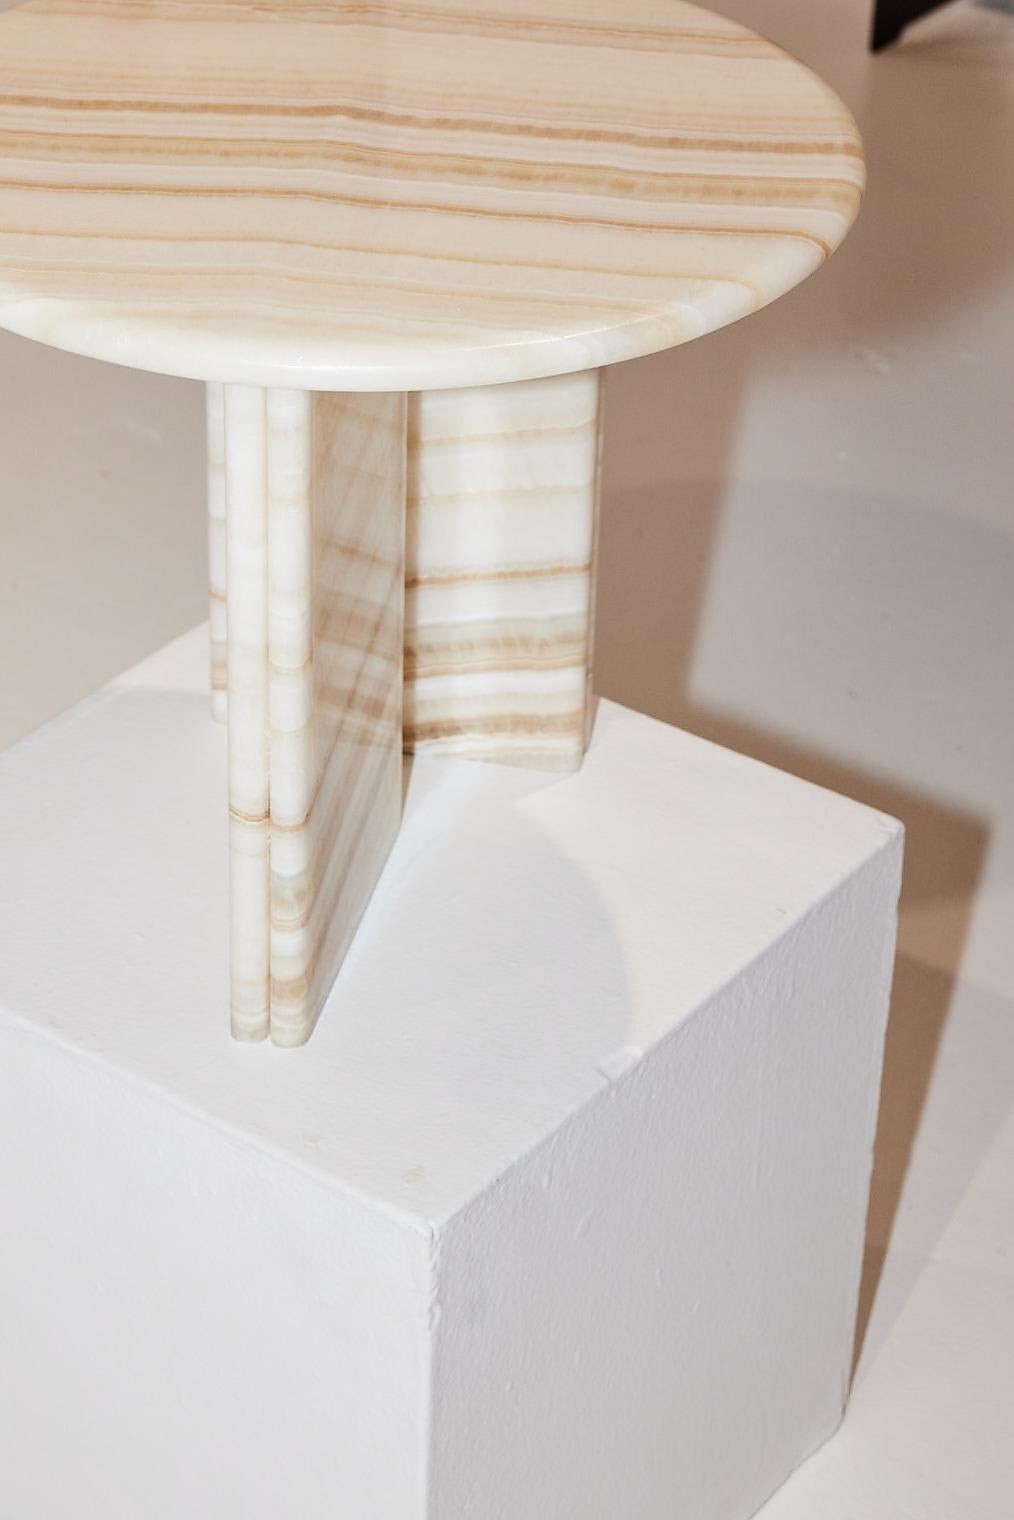 Onda Side Table in White Onyx designed by Just Adele.

The Onda Side Table is characterised by its soft forms and bold stone finishes. Translating to “wave” in Italian, the name Onda takes its cue from the double bullnose detail on the base and soft